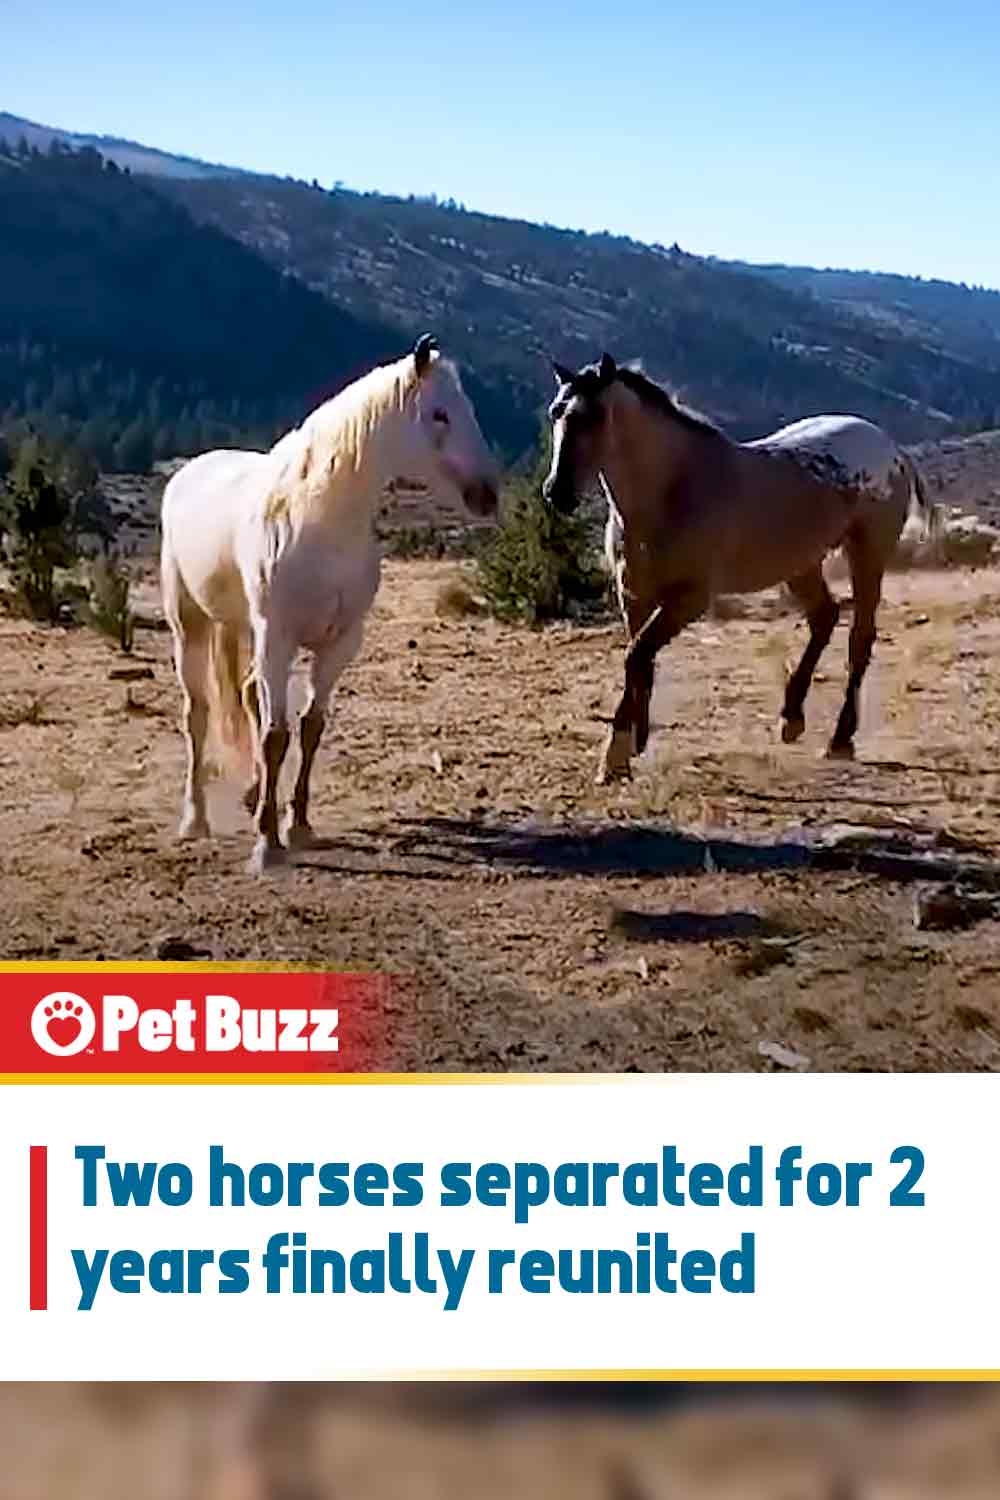 Two horses separated for 2 years finally reunited